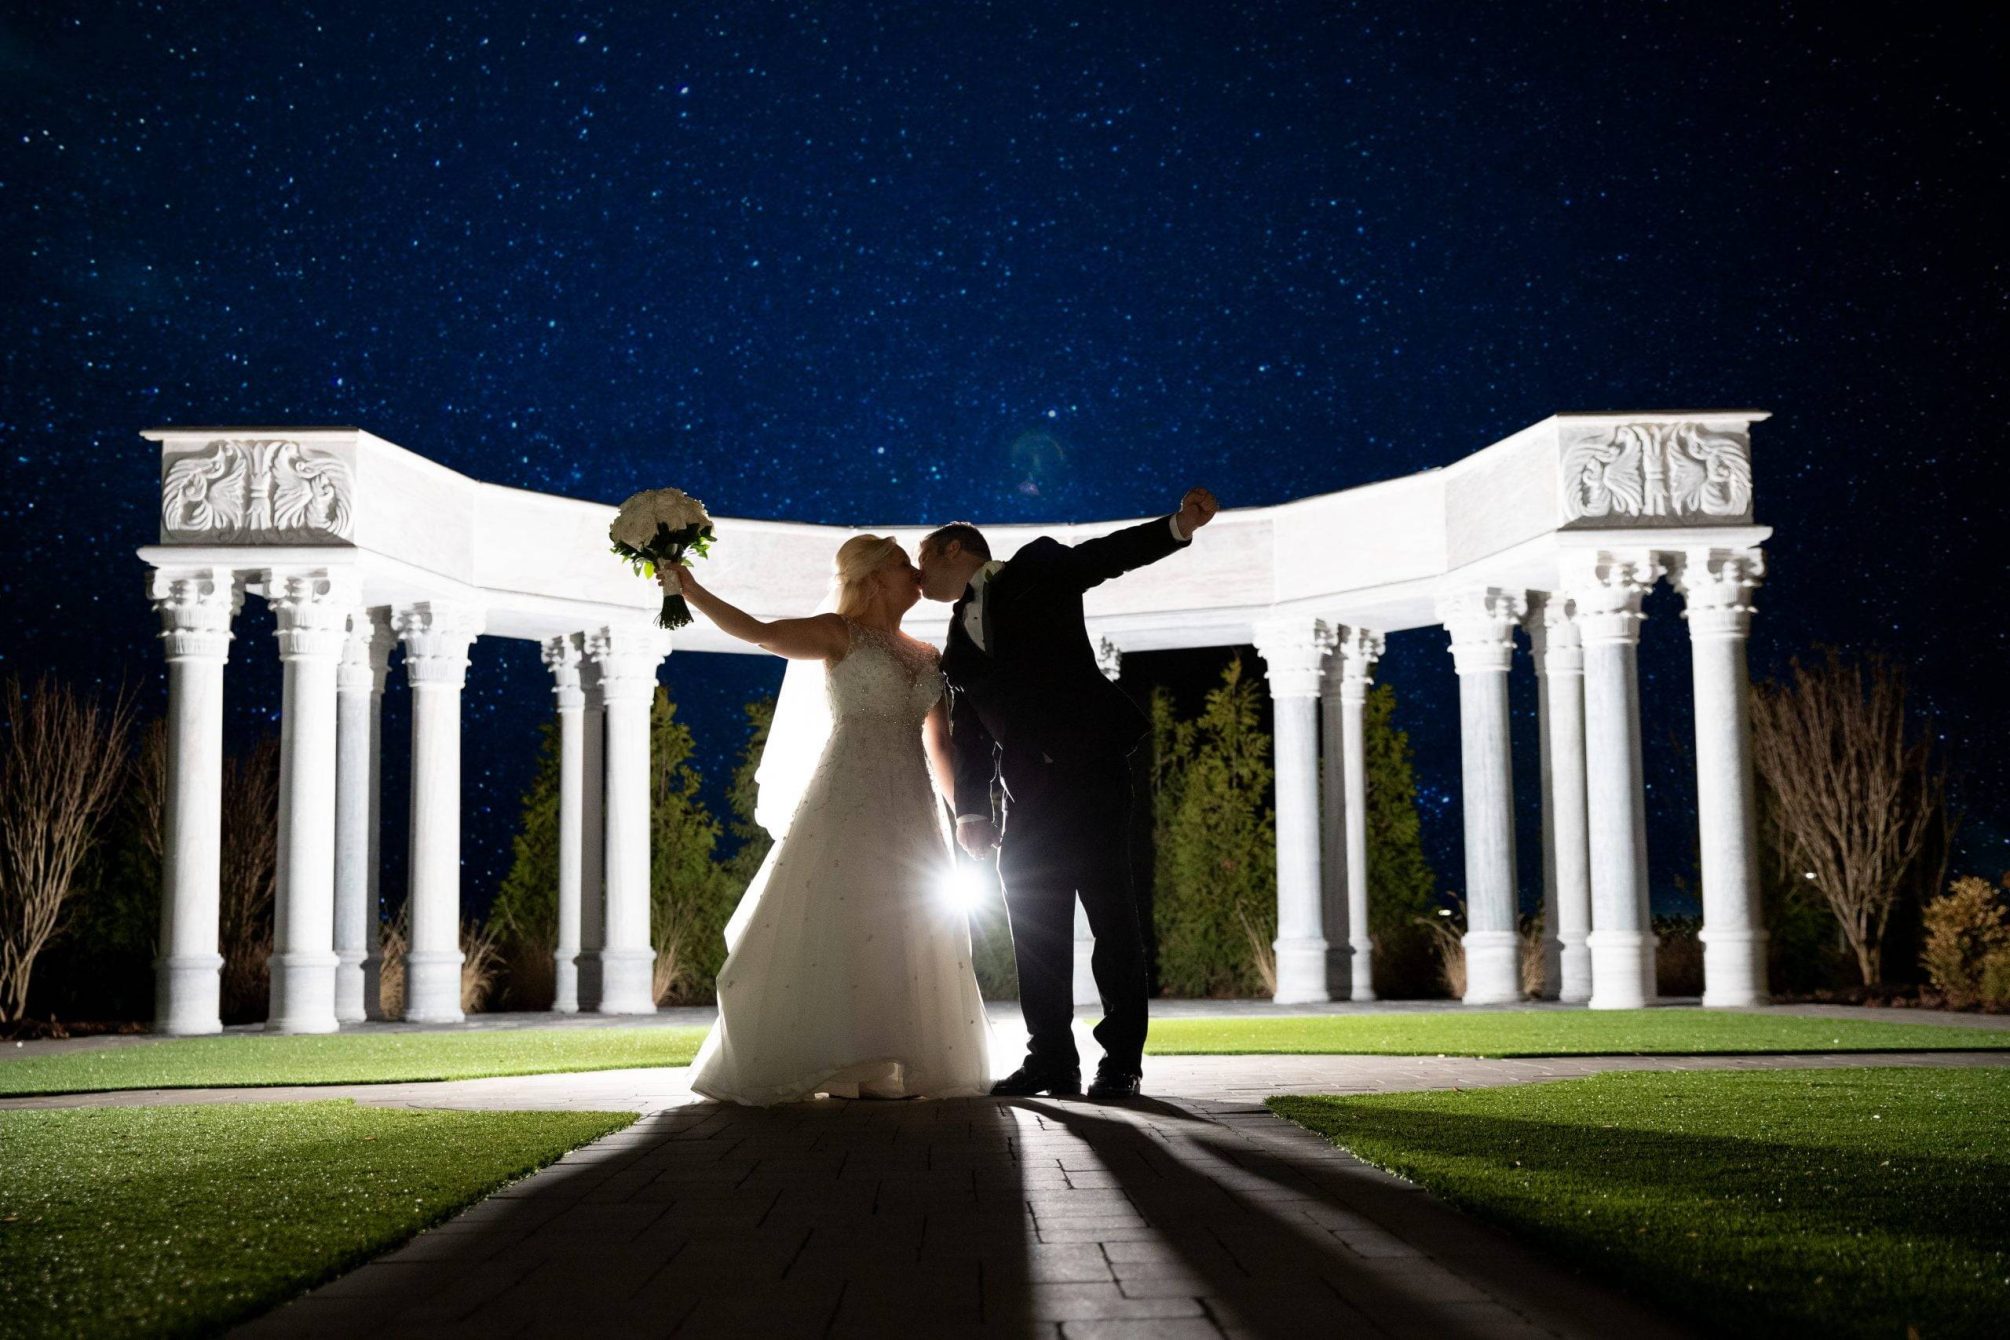 Meadow Wood bride and groom at night